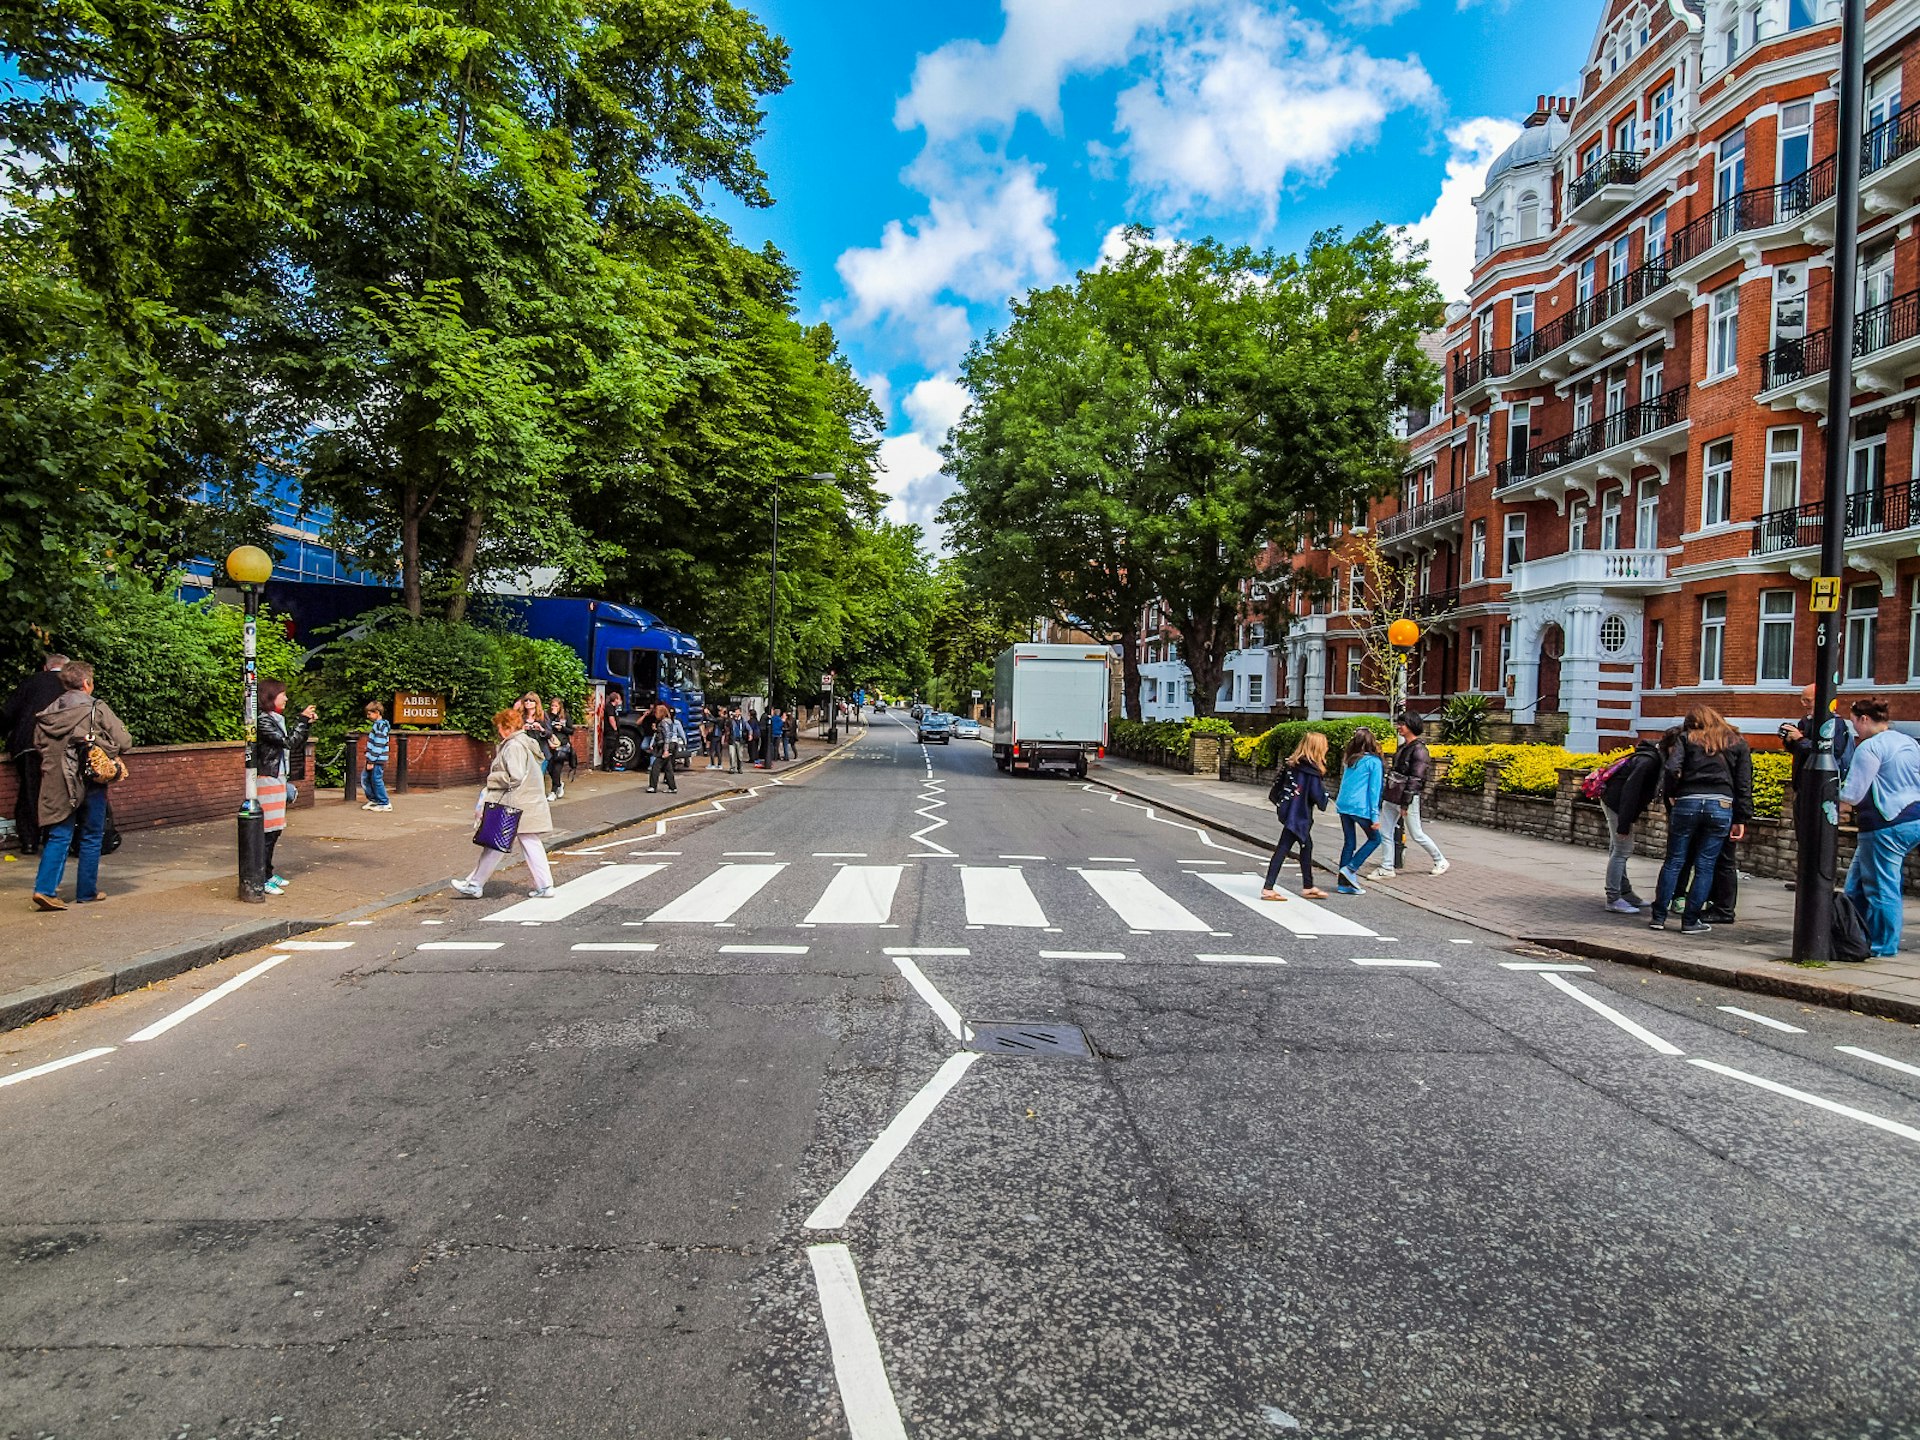 The iconic Abbey Road crossing in London featured on The Beatles' Abbey Road album